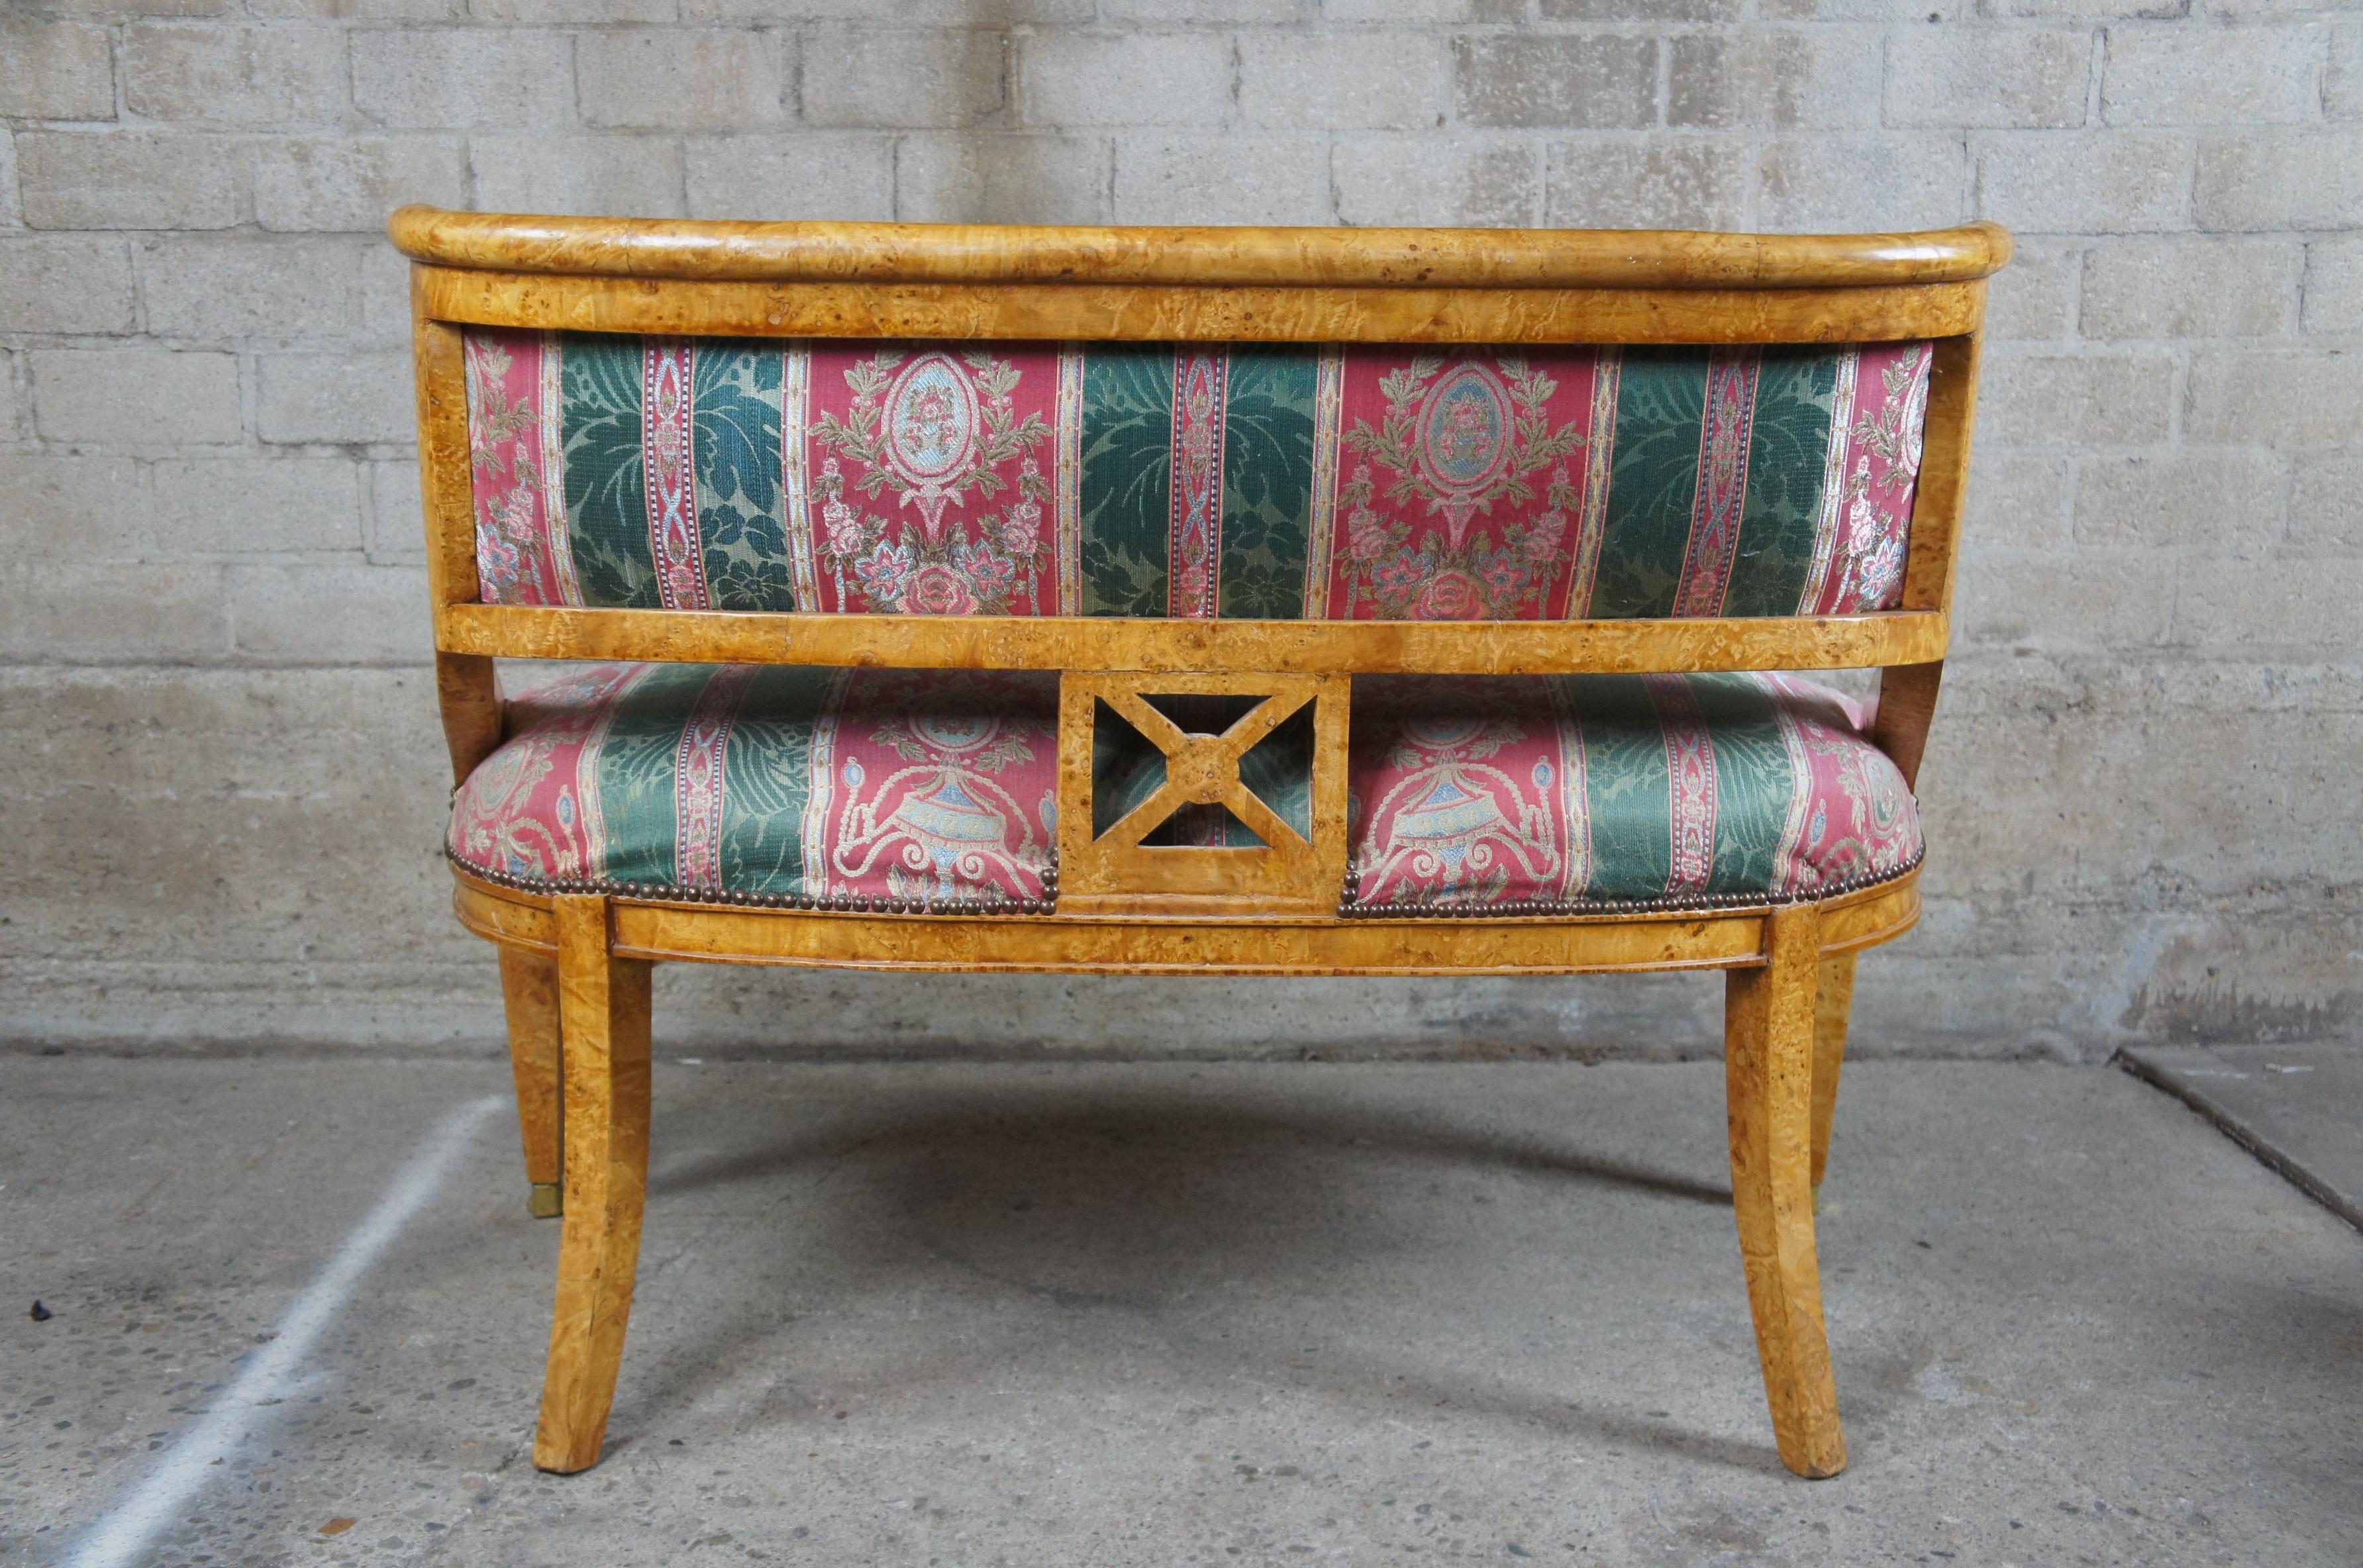 Antique Egyptian Revival Olive Burlwood Parlor Settee Bench Neoclassical 1